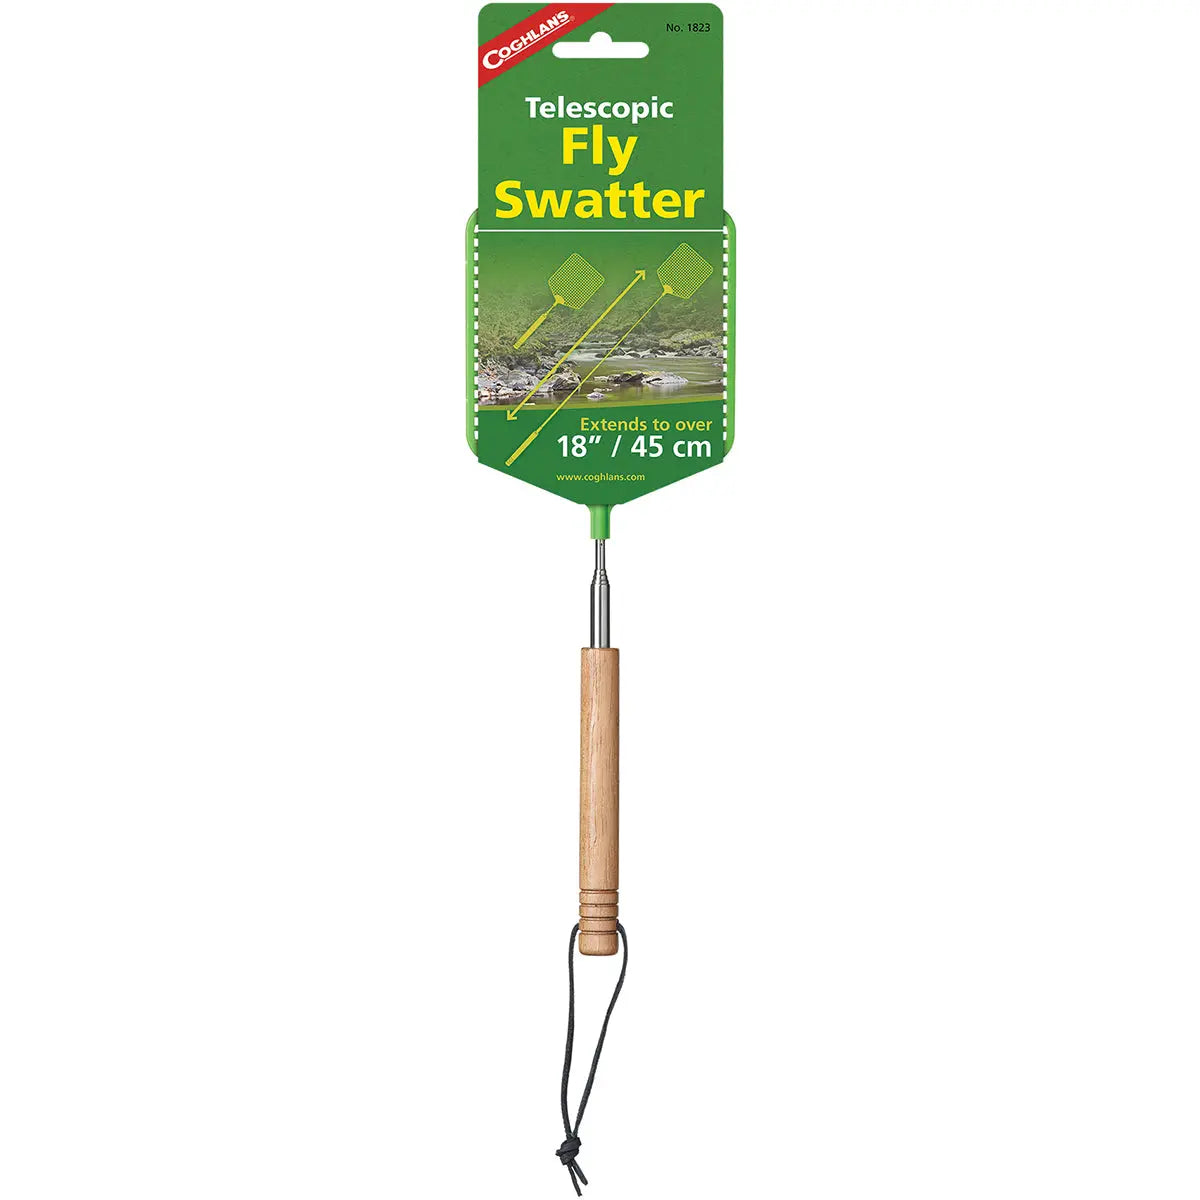 Coghlan's Telescopic Fly Swatter, Bugs Mosquitoes Extends to 18", Compact Design Coghlan's